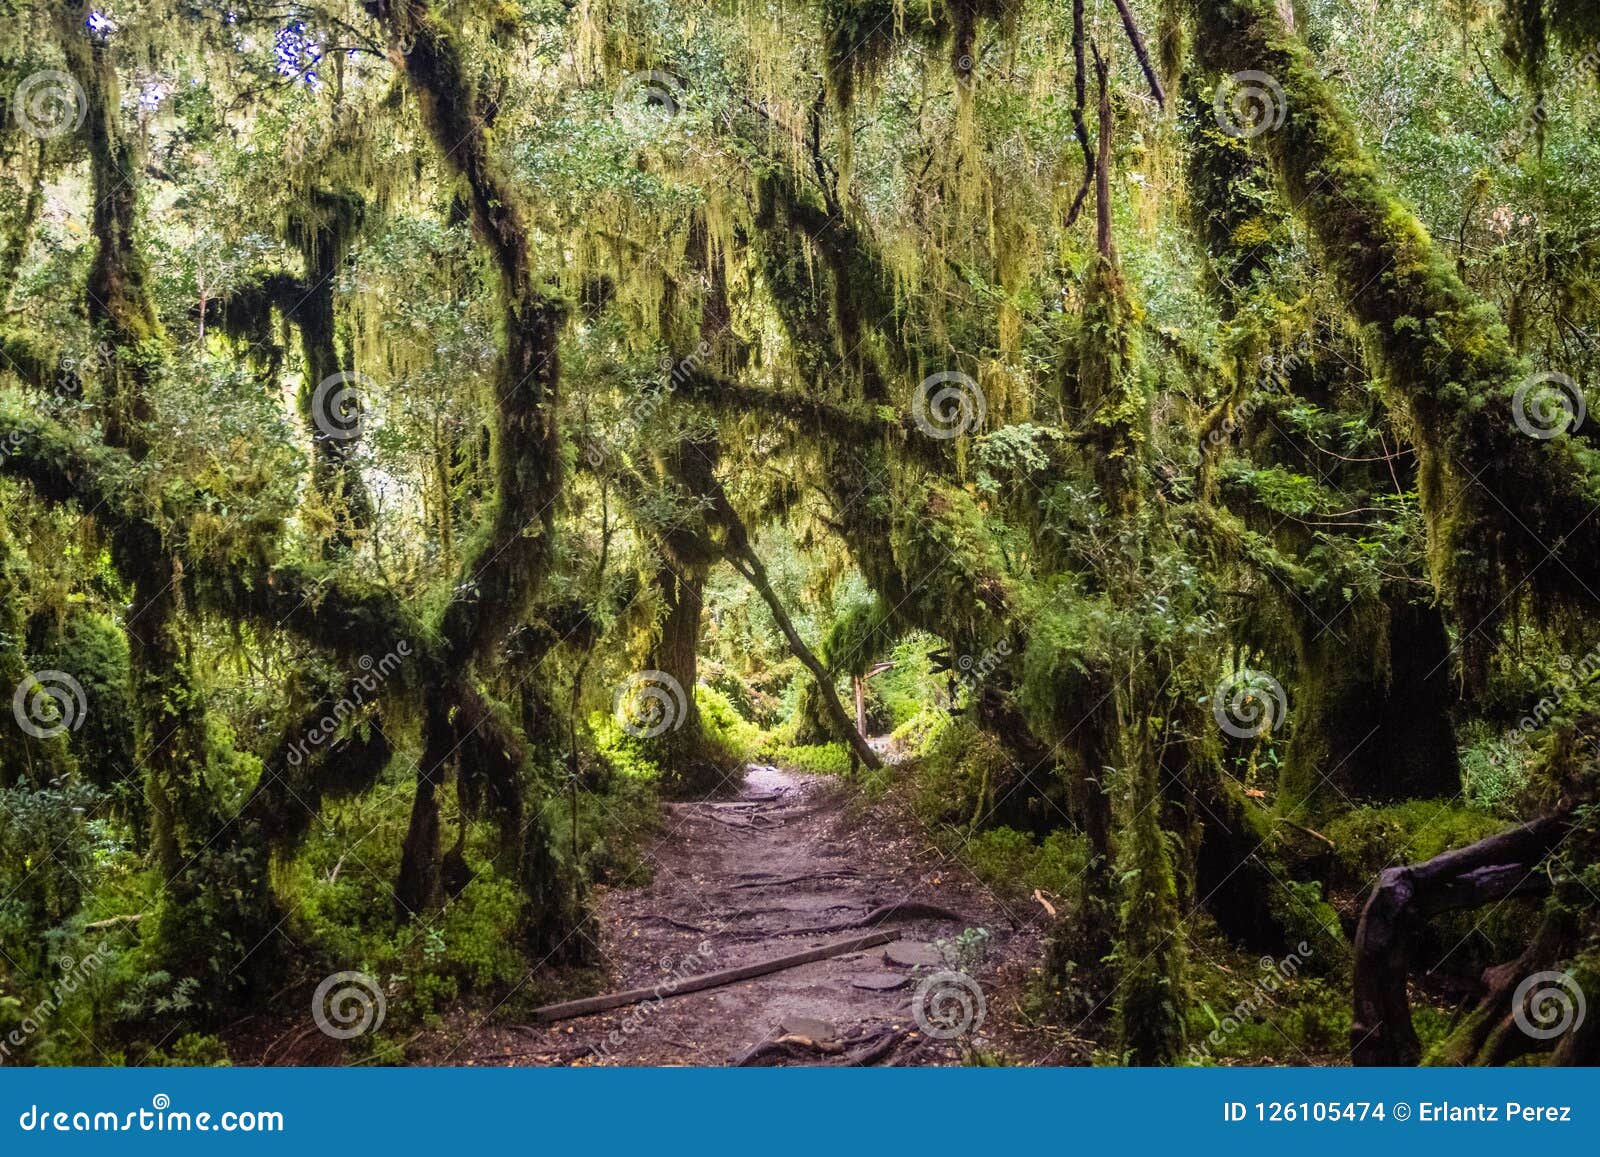 detail of the enchanted forest in carretera austral, bosque encantado chile